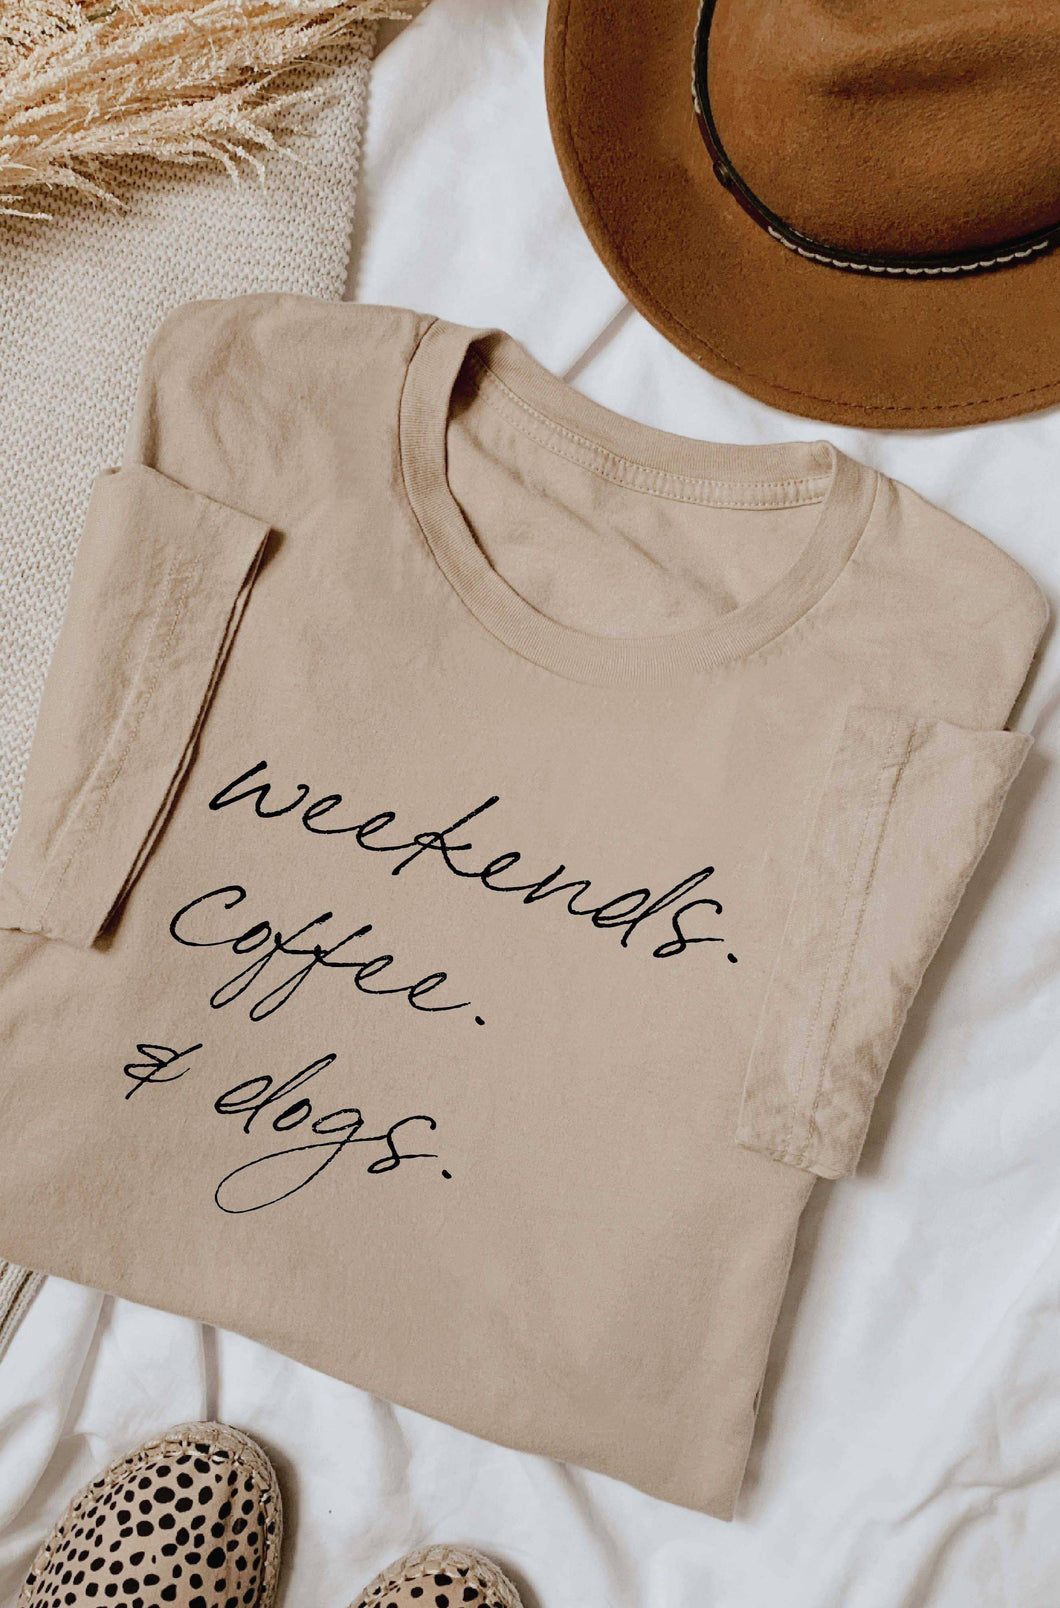 WEEKENDS COFFEE AND DOGS Graphic T-Shirt